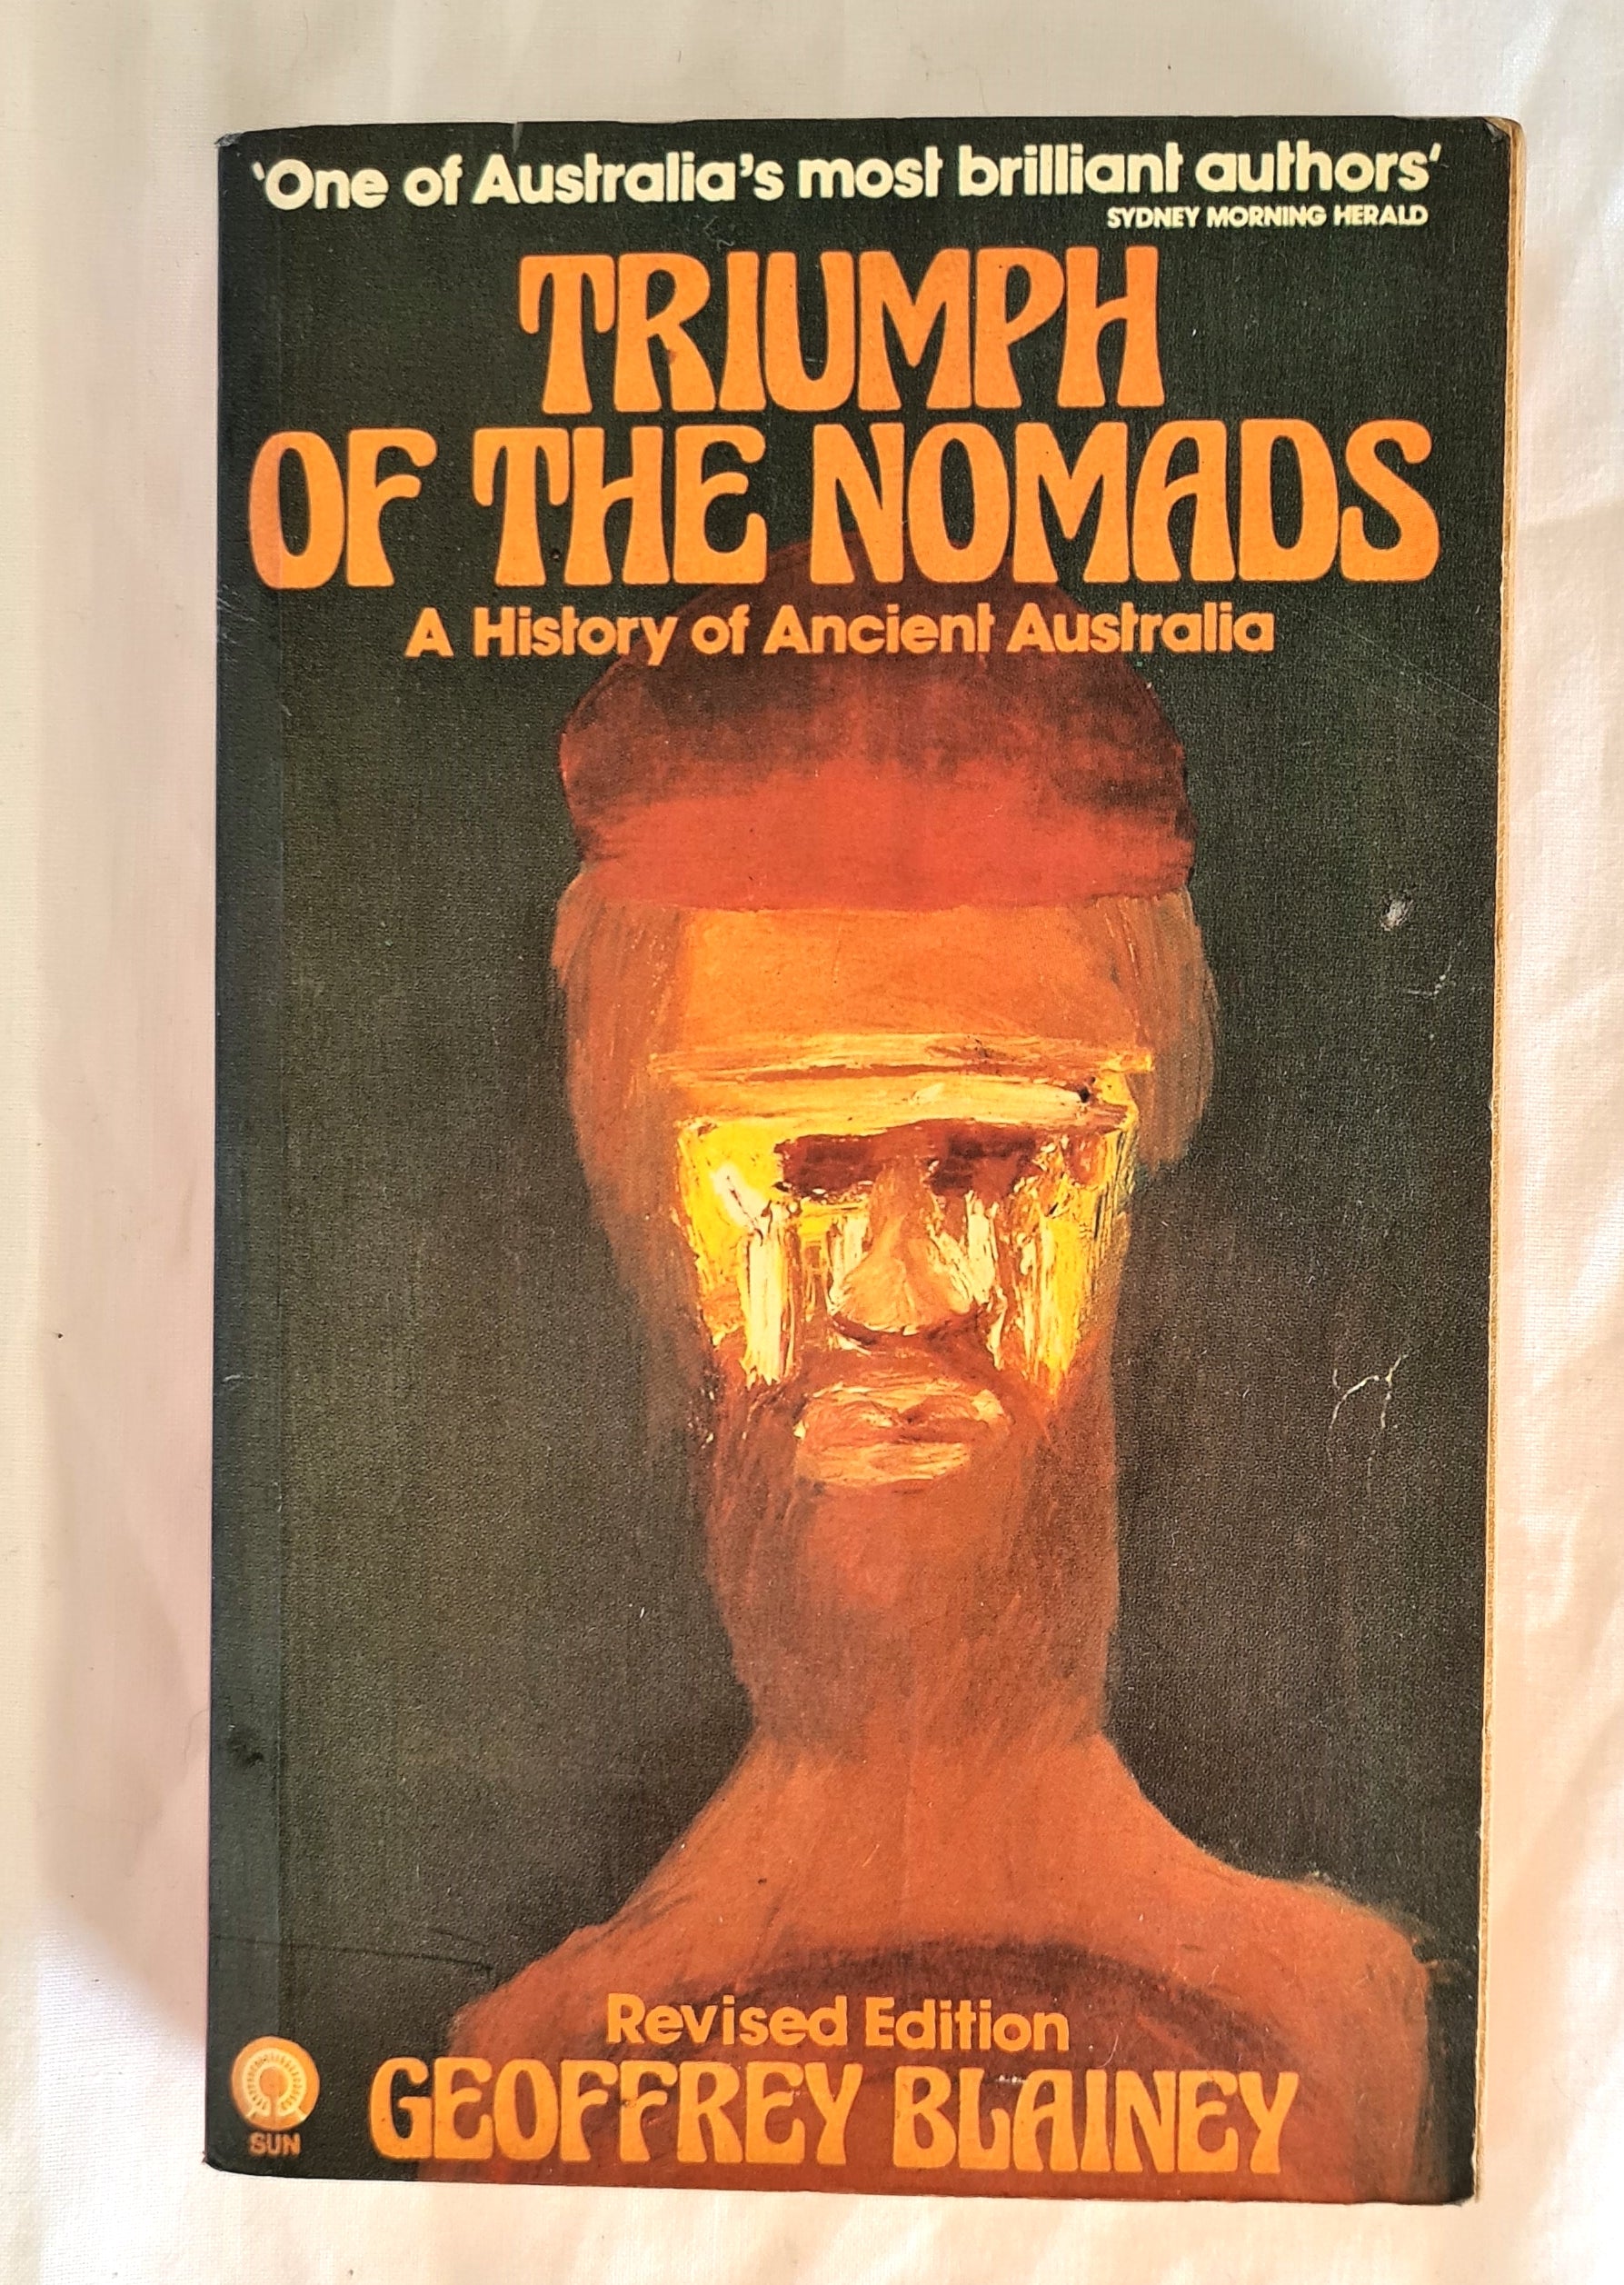 Triumph of the Nomads  A History of Ancient Australia  by Geoffrey Blainey